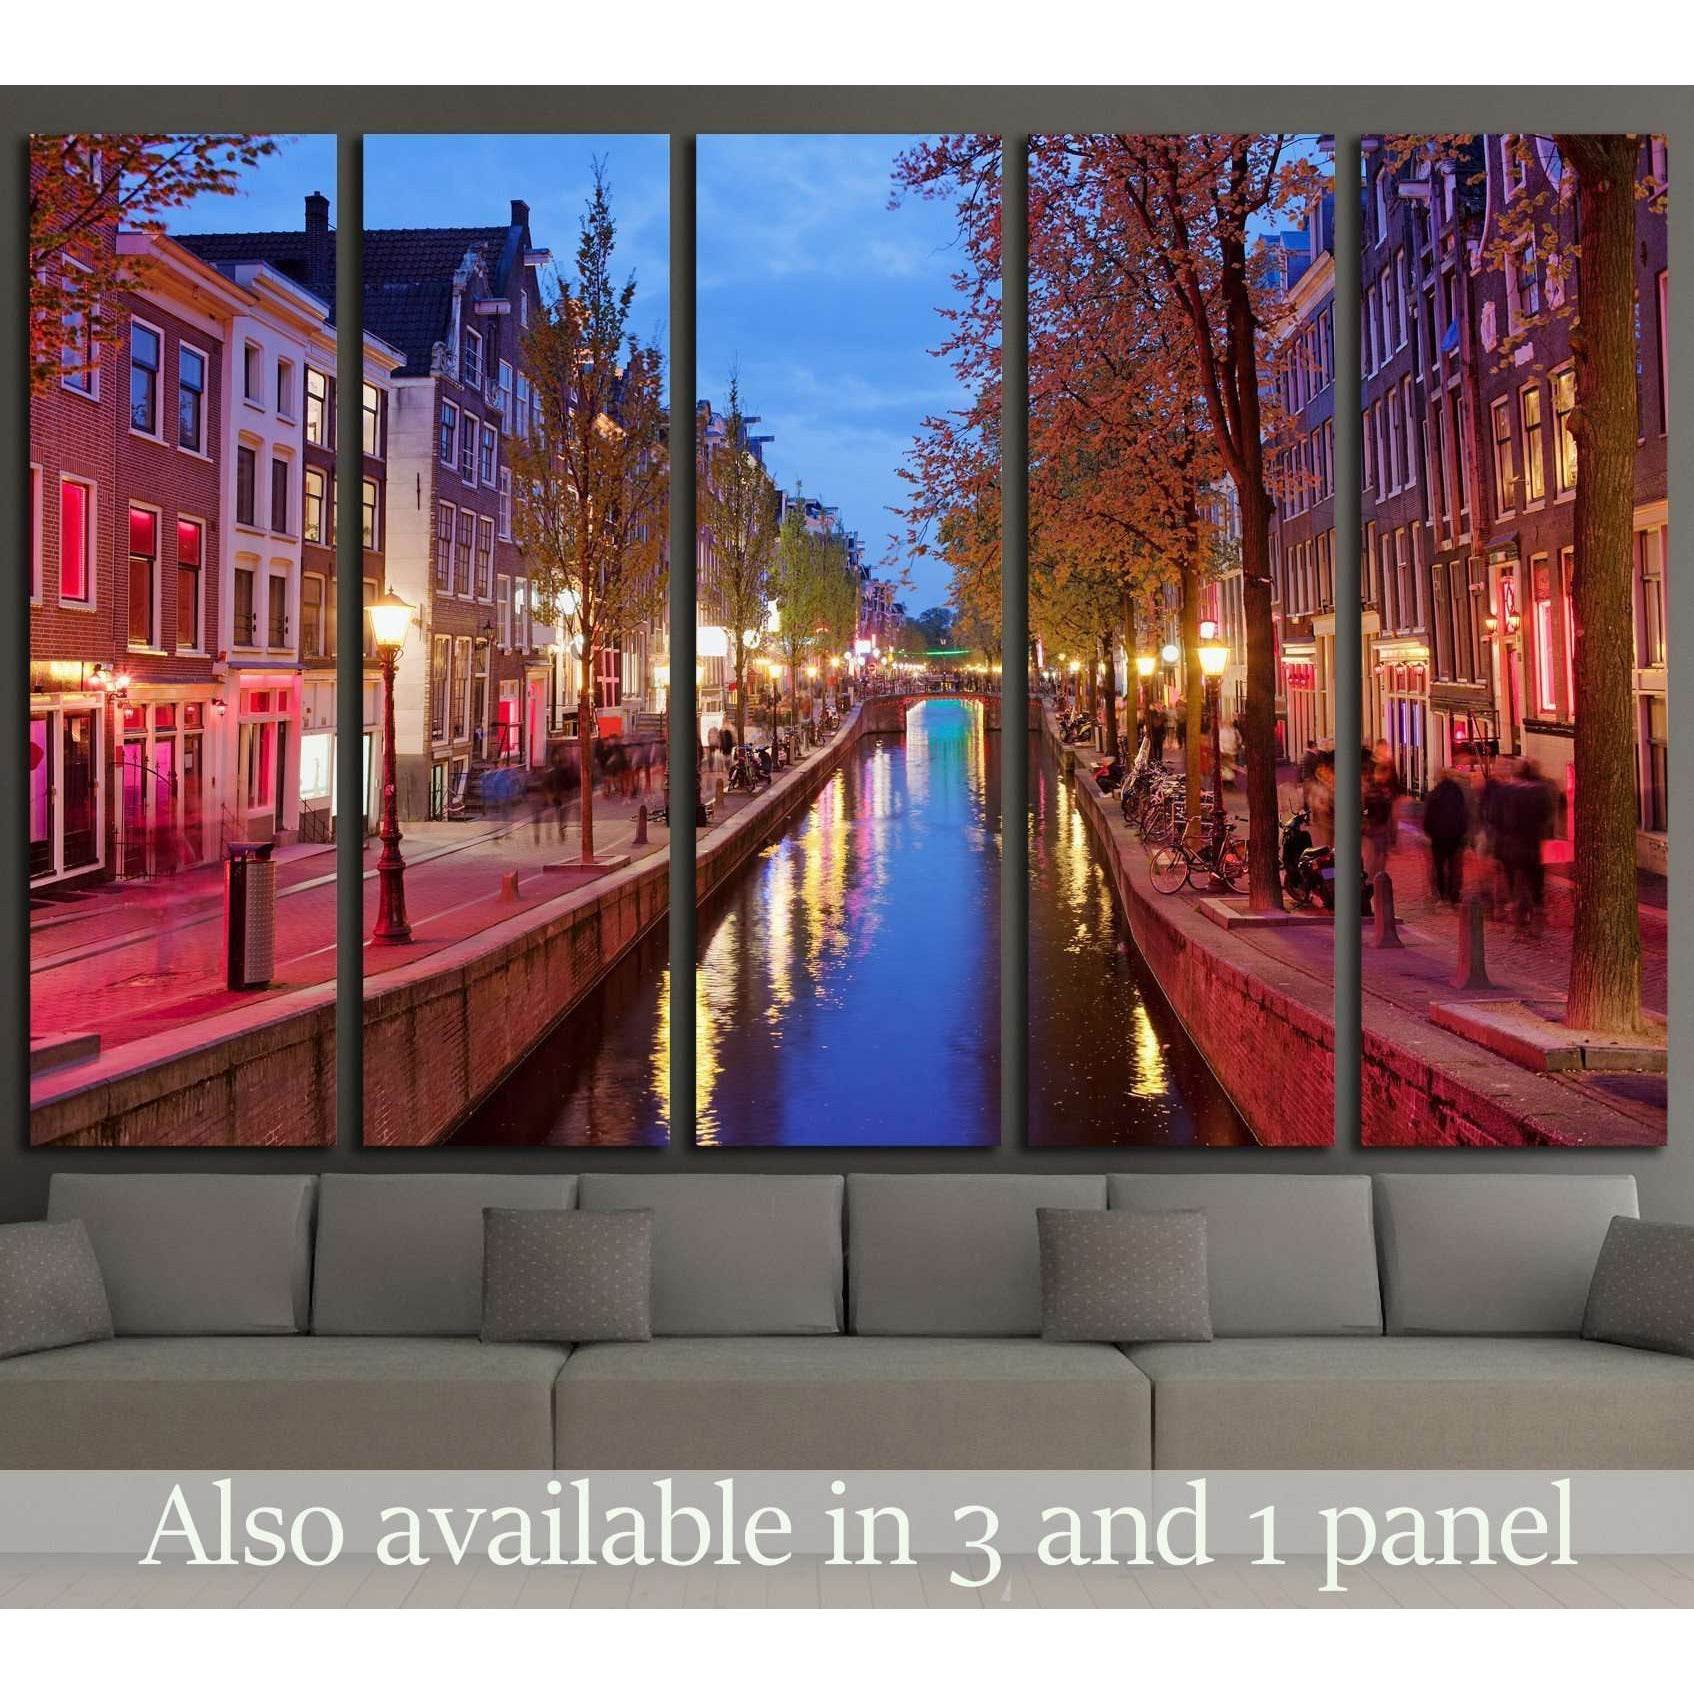 Amsterdam Red Light District area in the city centre at dusk, North Holland, the Netherlands №2156 Ready to Hang Canvas Print